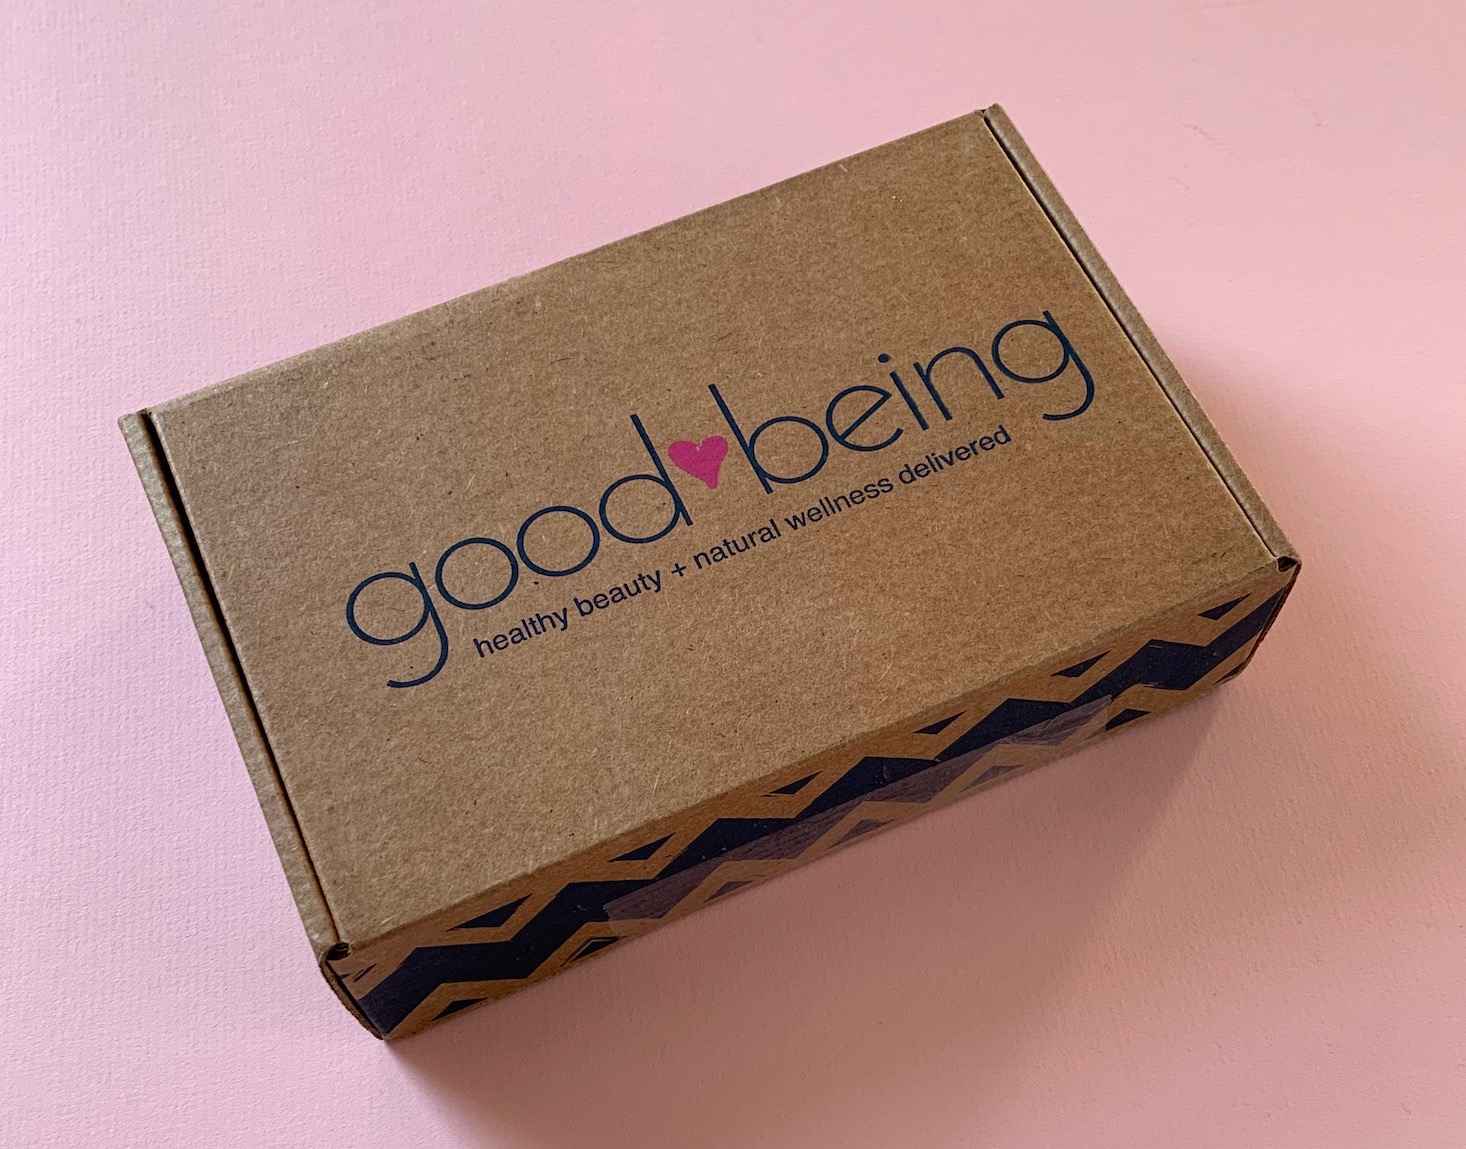 GoodBeing Box Subscription Review + Coupon – December 2018